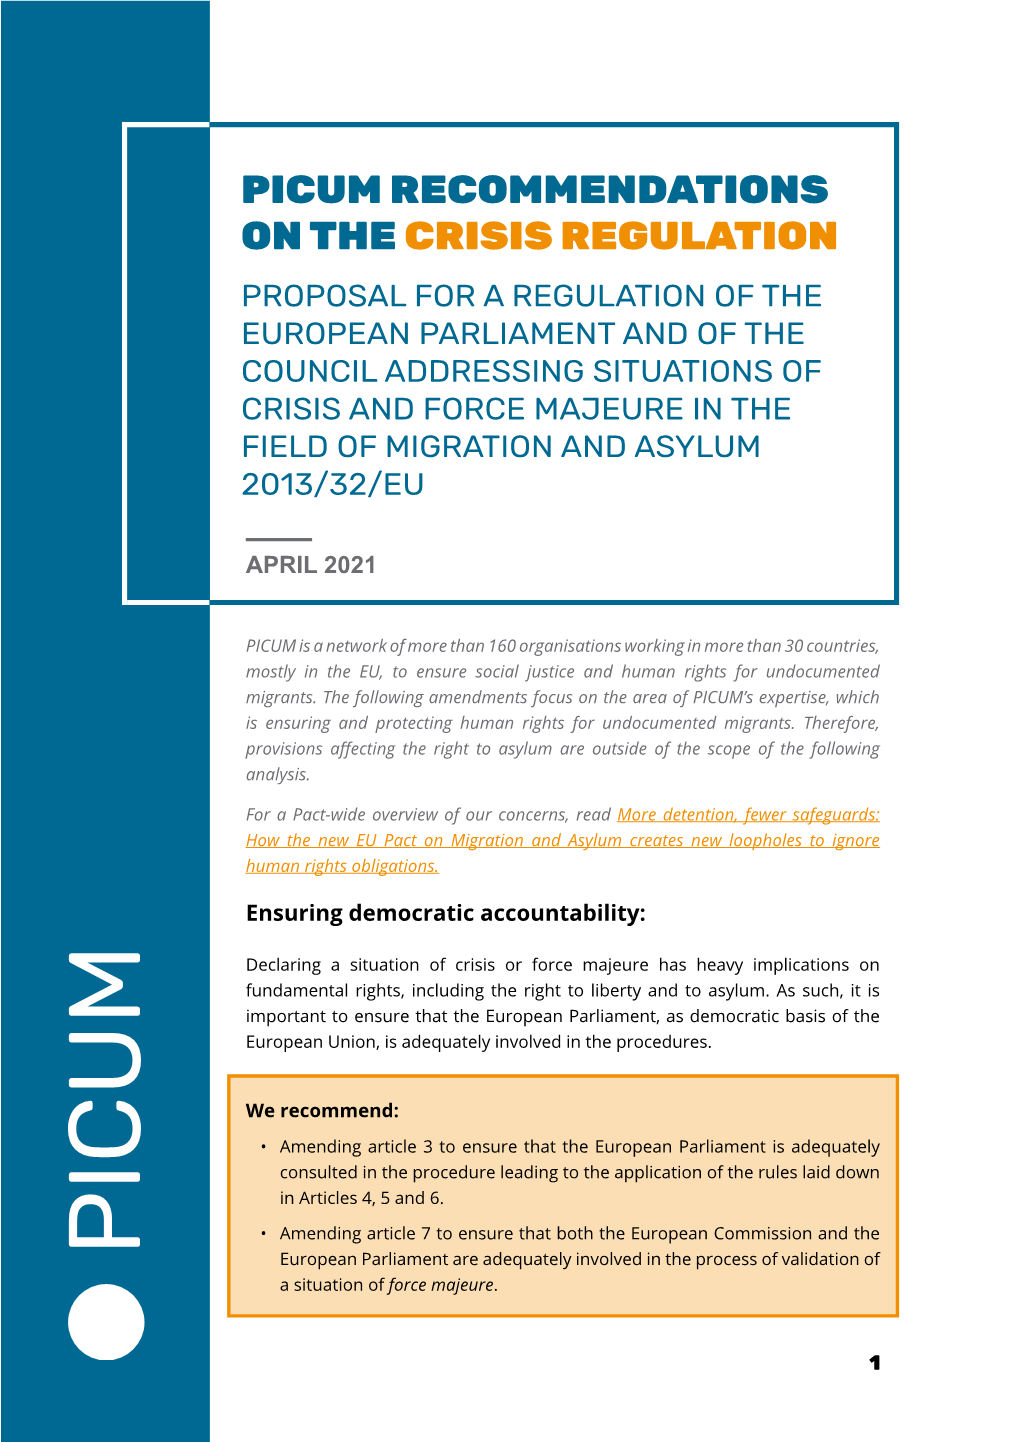 Picum Recommendations on the Crisis Regulation